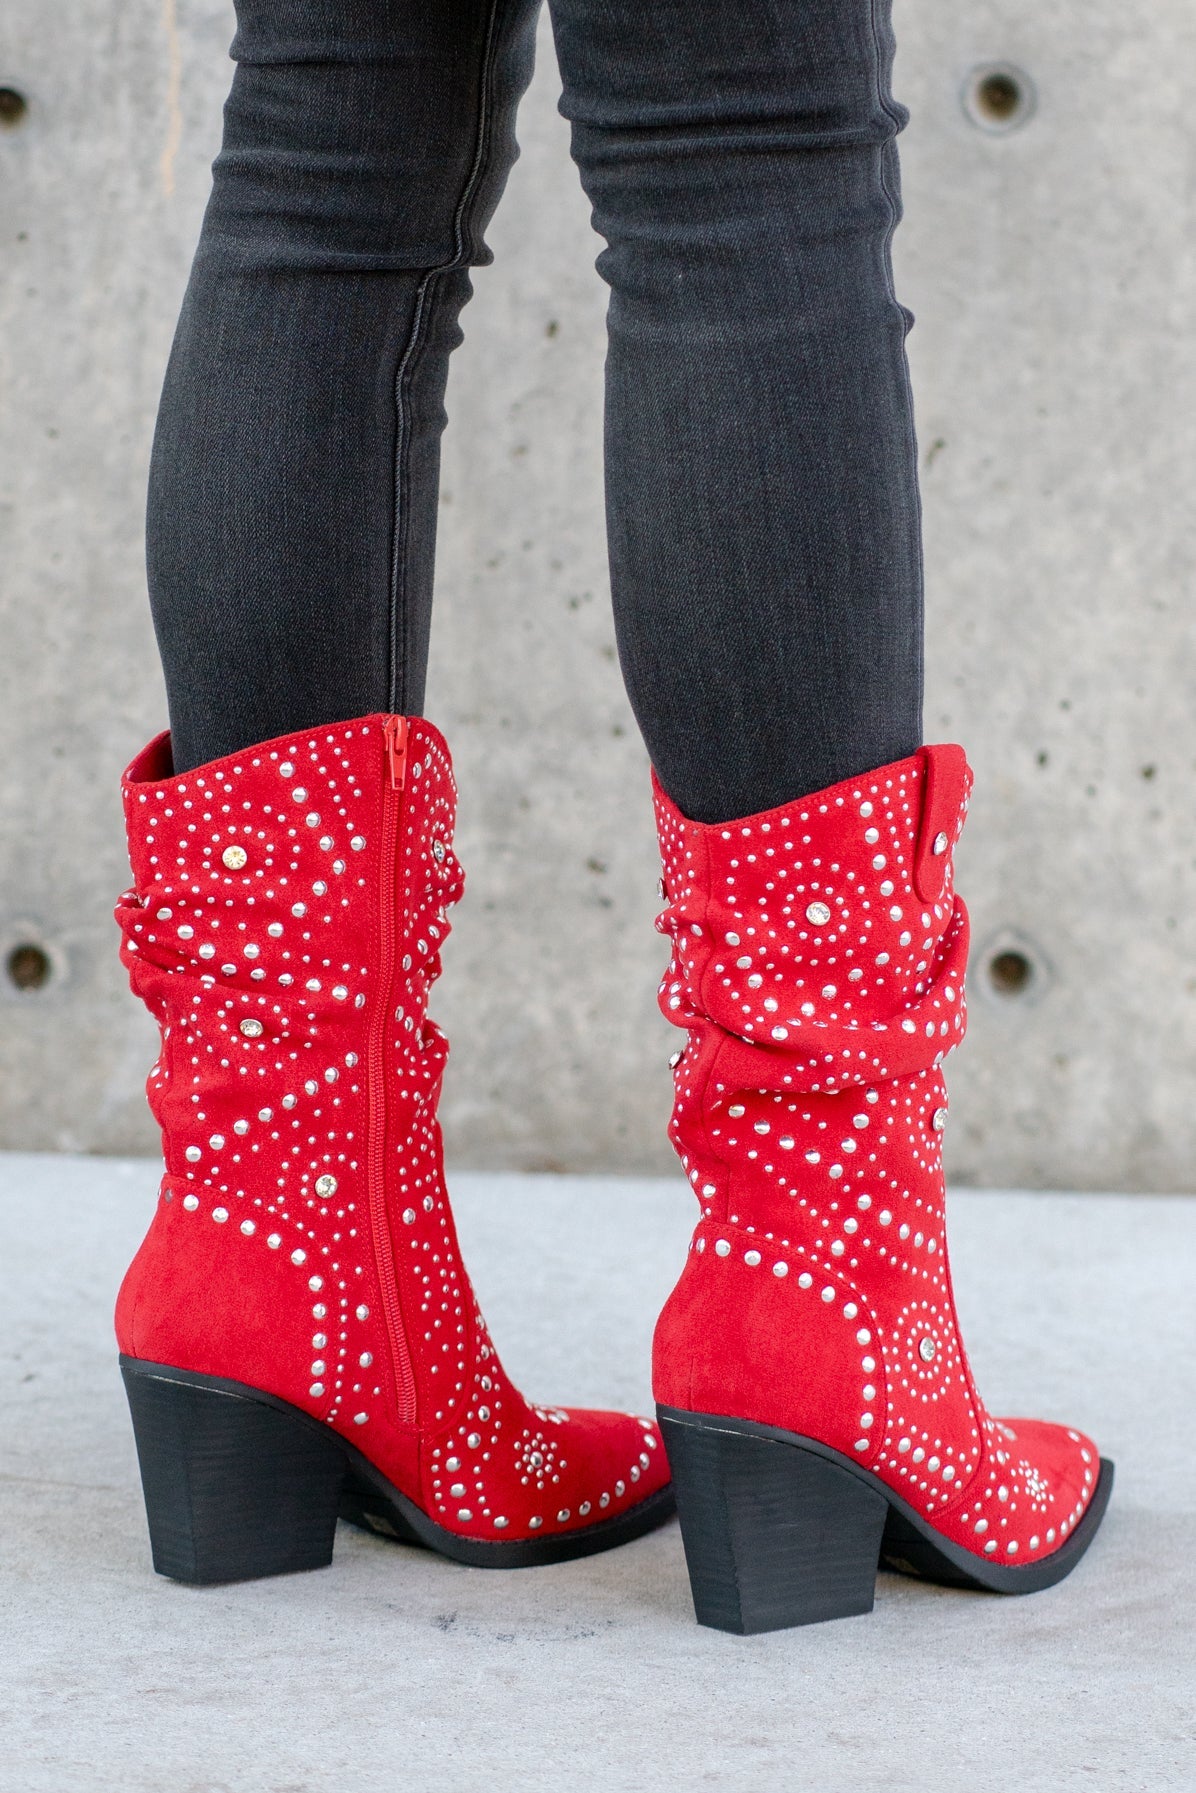 Very G Shoes Bedazzled Stellar Slouch Boots - Red – American Blues